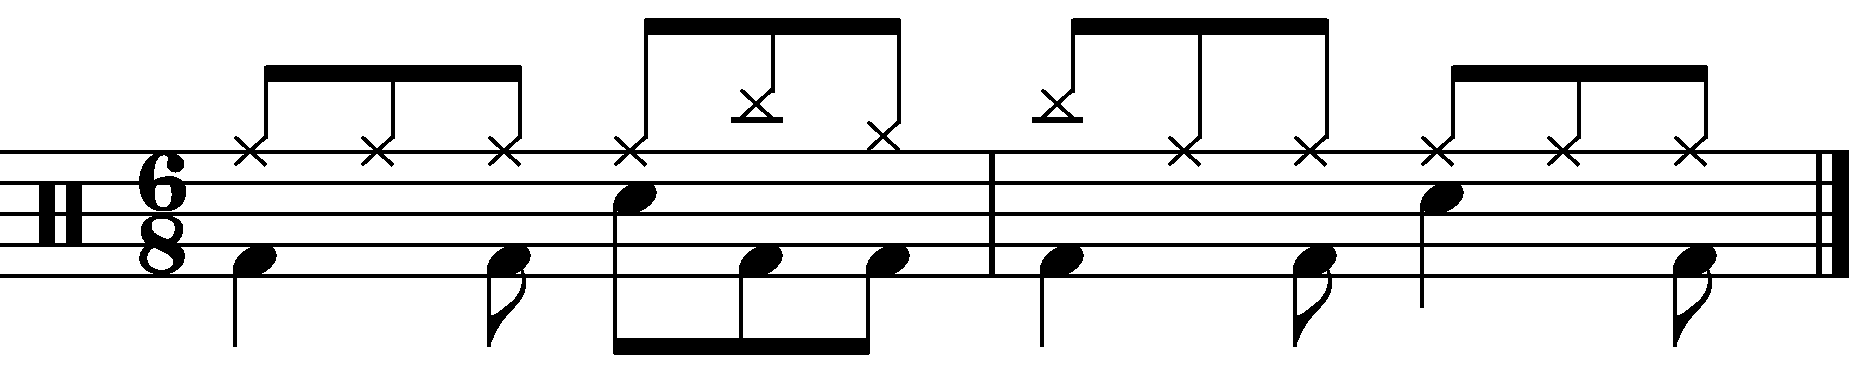 The concept applied to a 6/8 groove